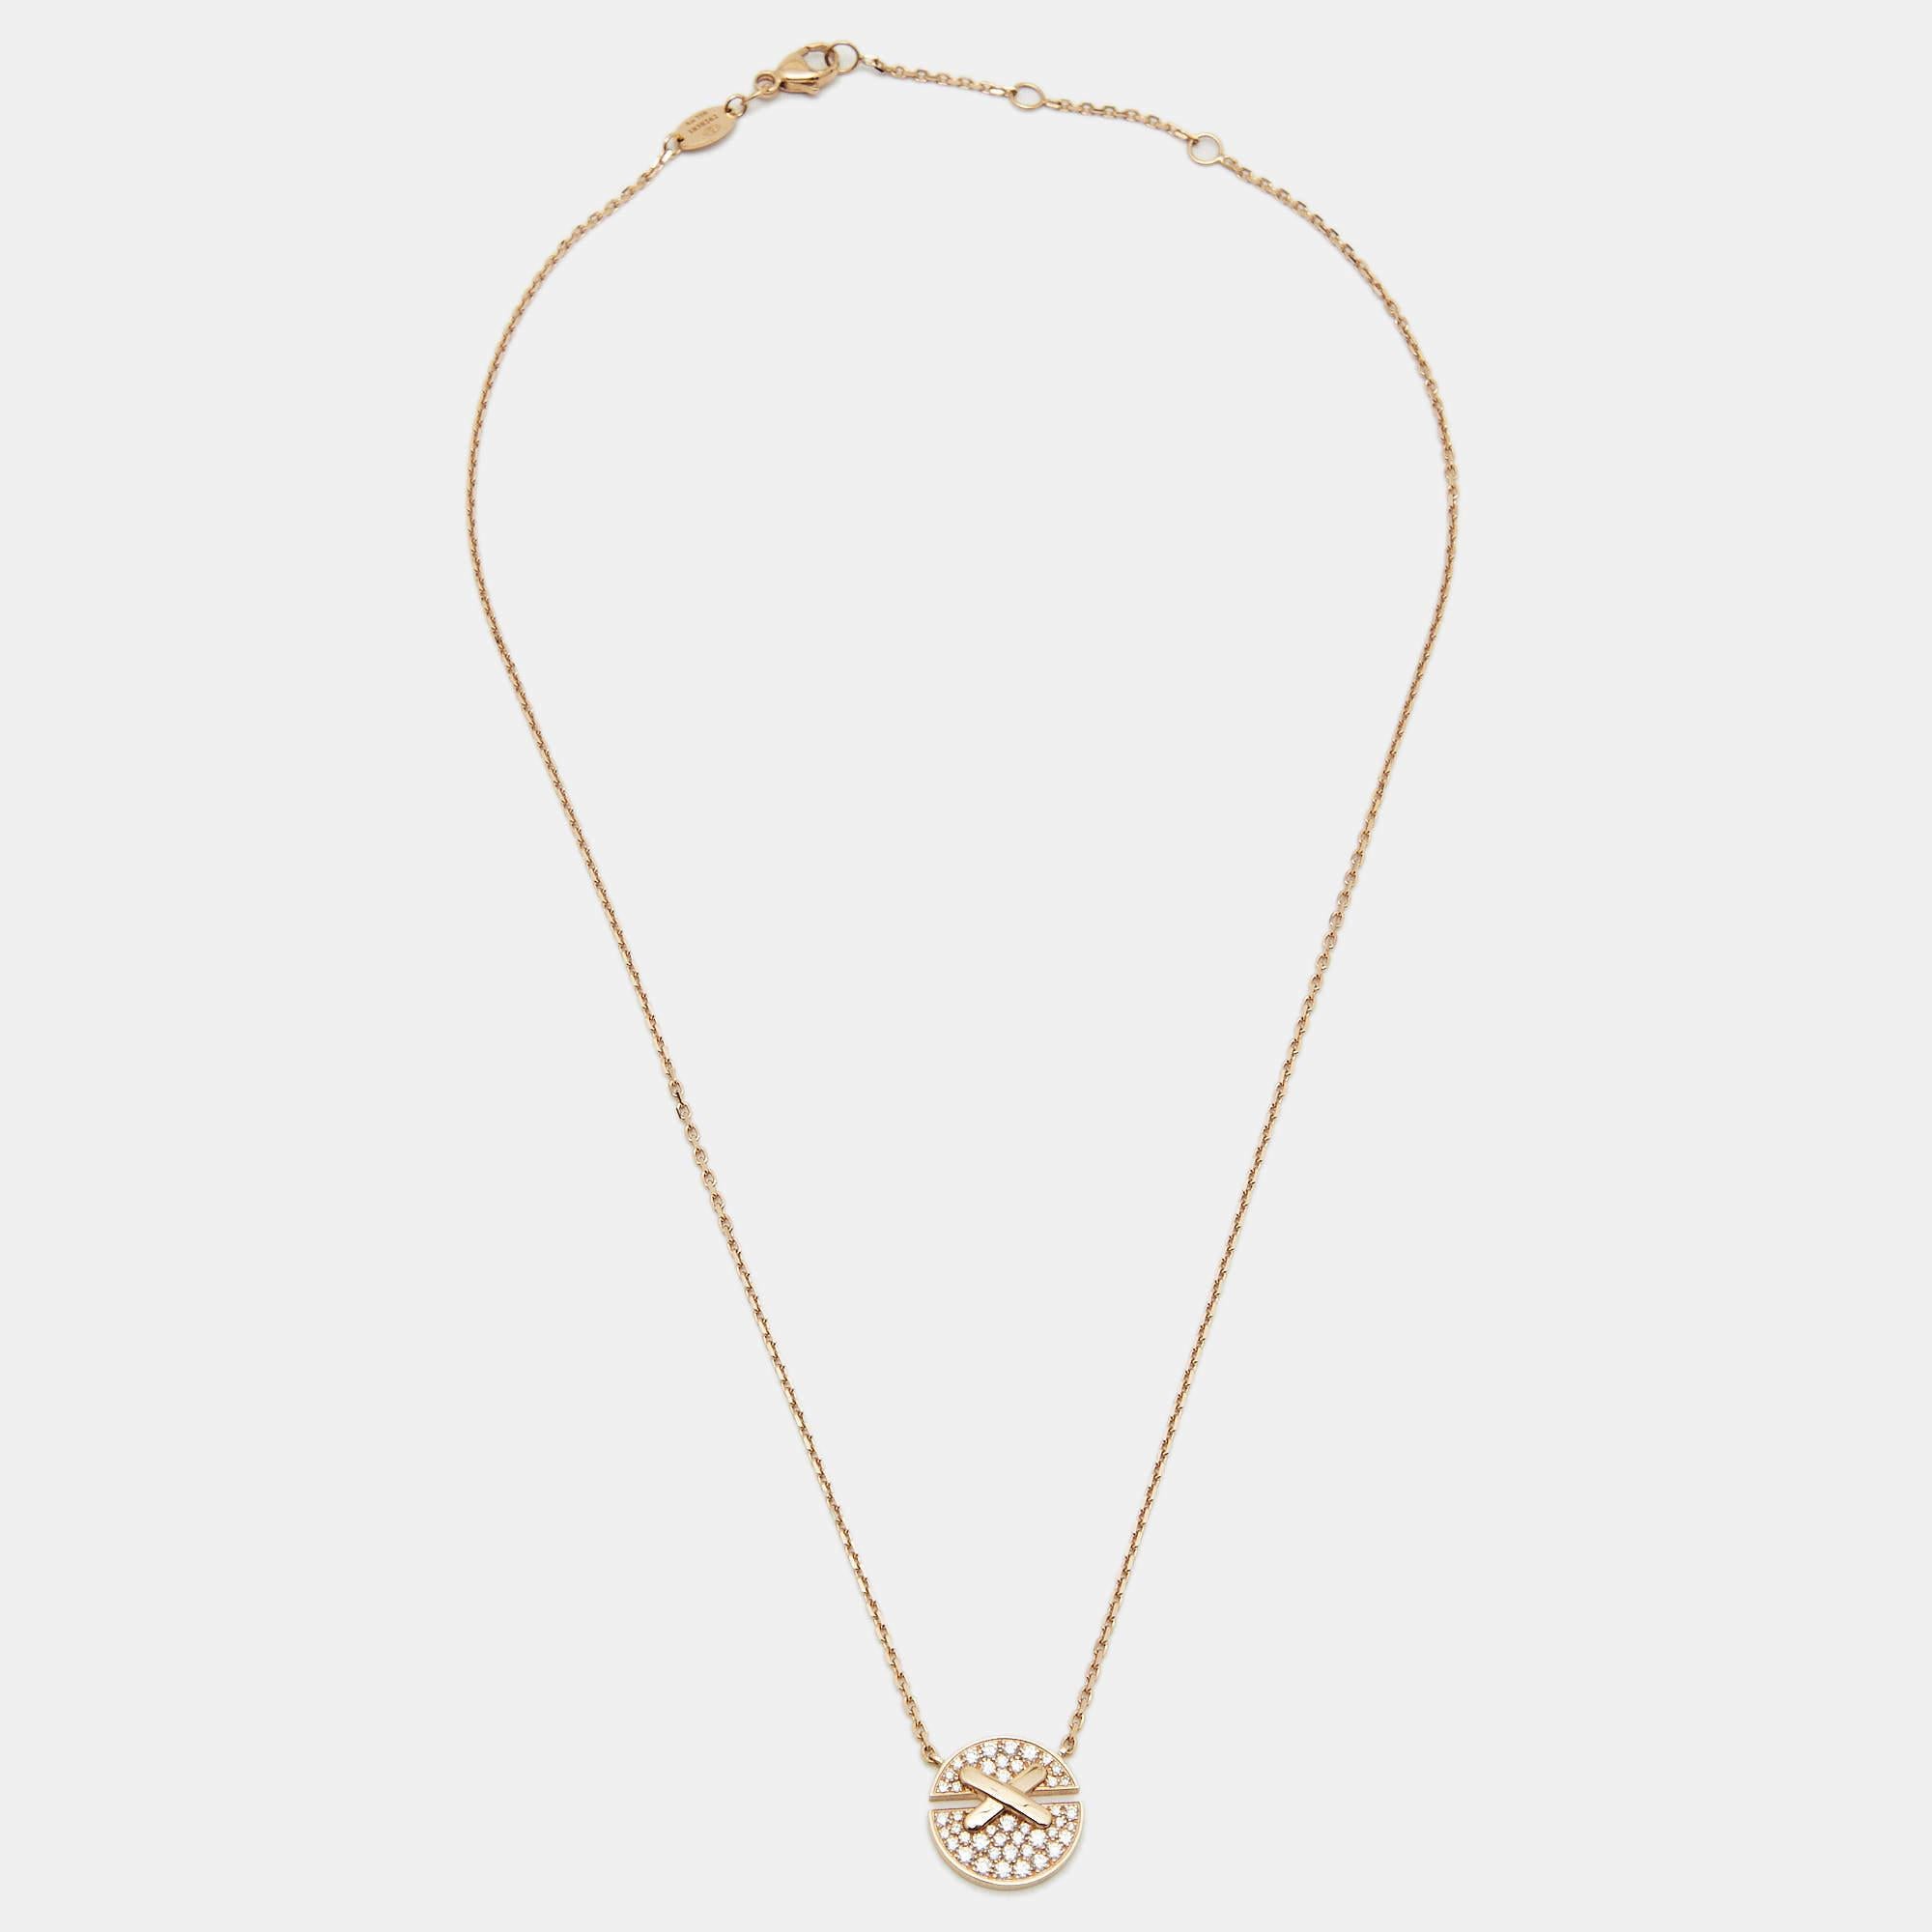 The fine workmanship, use of precious metals, and unique appeal make this Chaumet necklace for women a fabulous purchase. It's a worthy investment.

